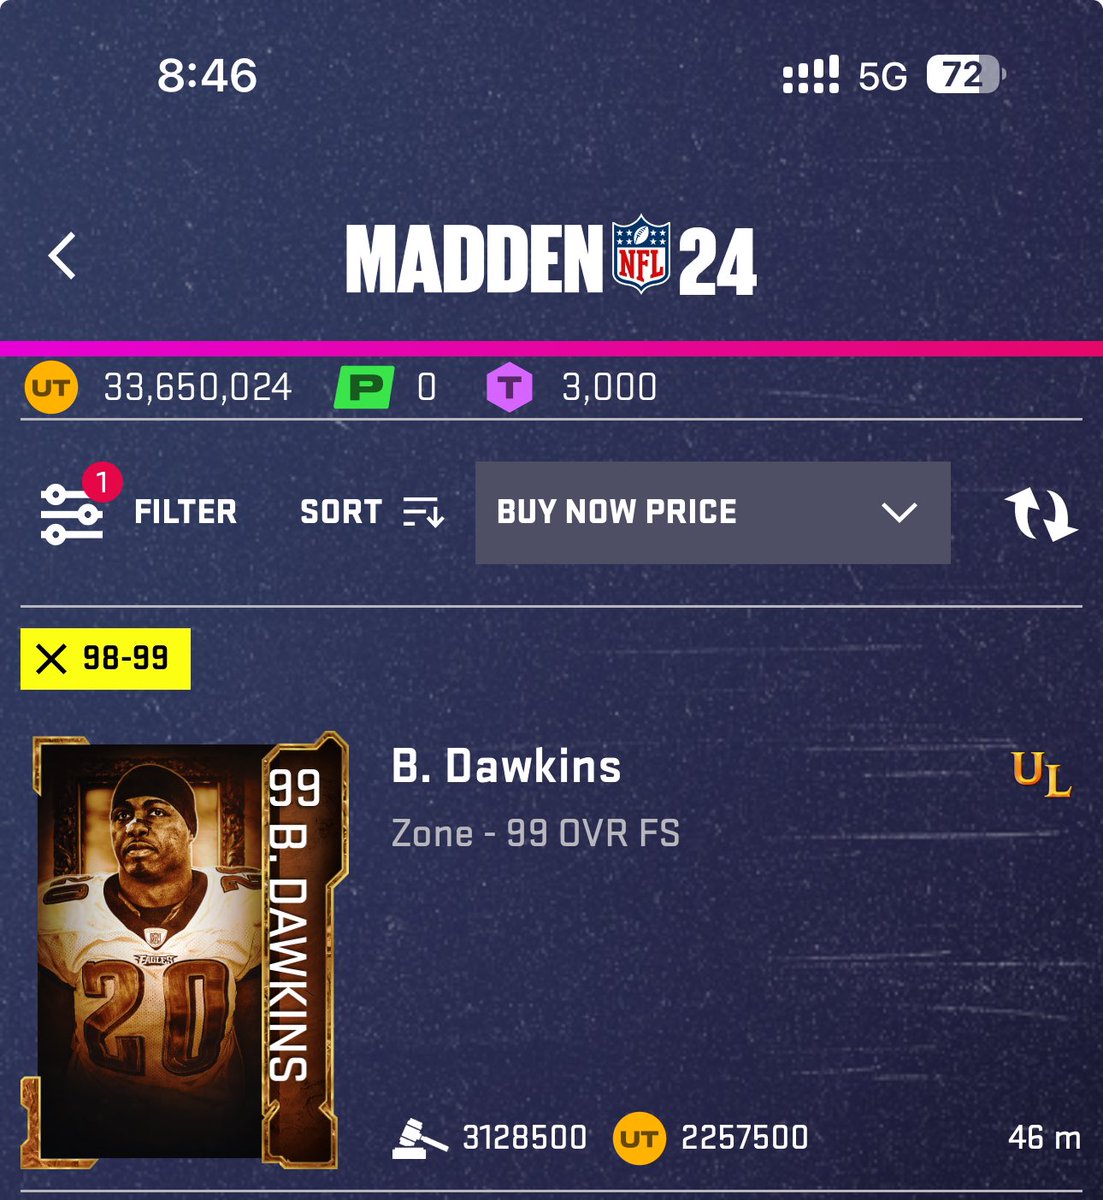 Online buying and selling mut coins Dm if you want to buy or sell We got 50 mil on sale Looking to buy 30 mil ps5 coins Best price around on All platforms #Madden24